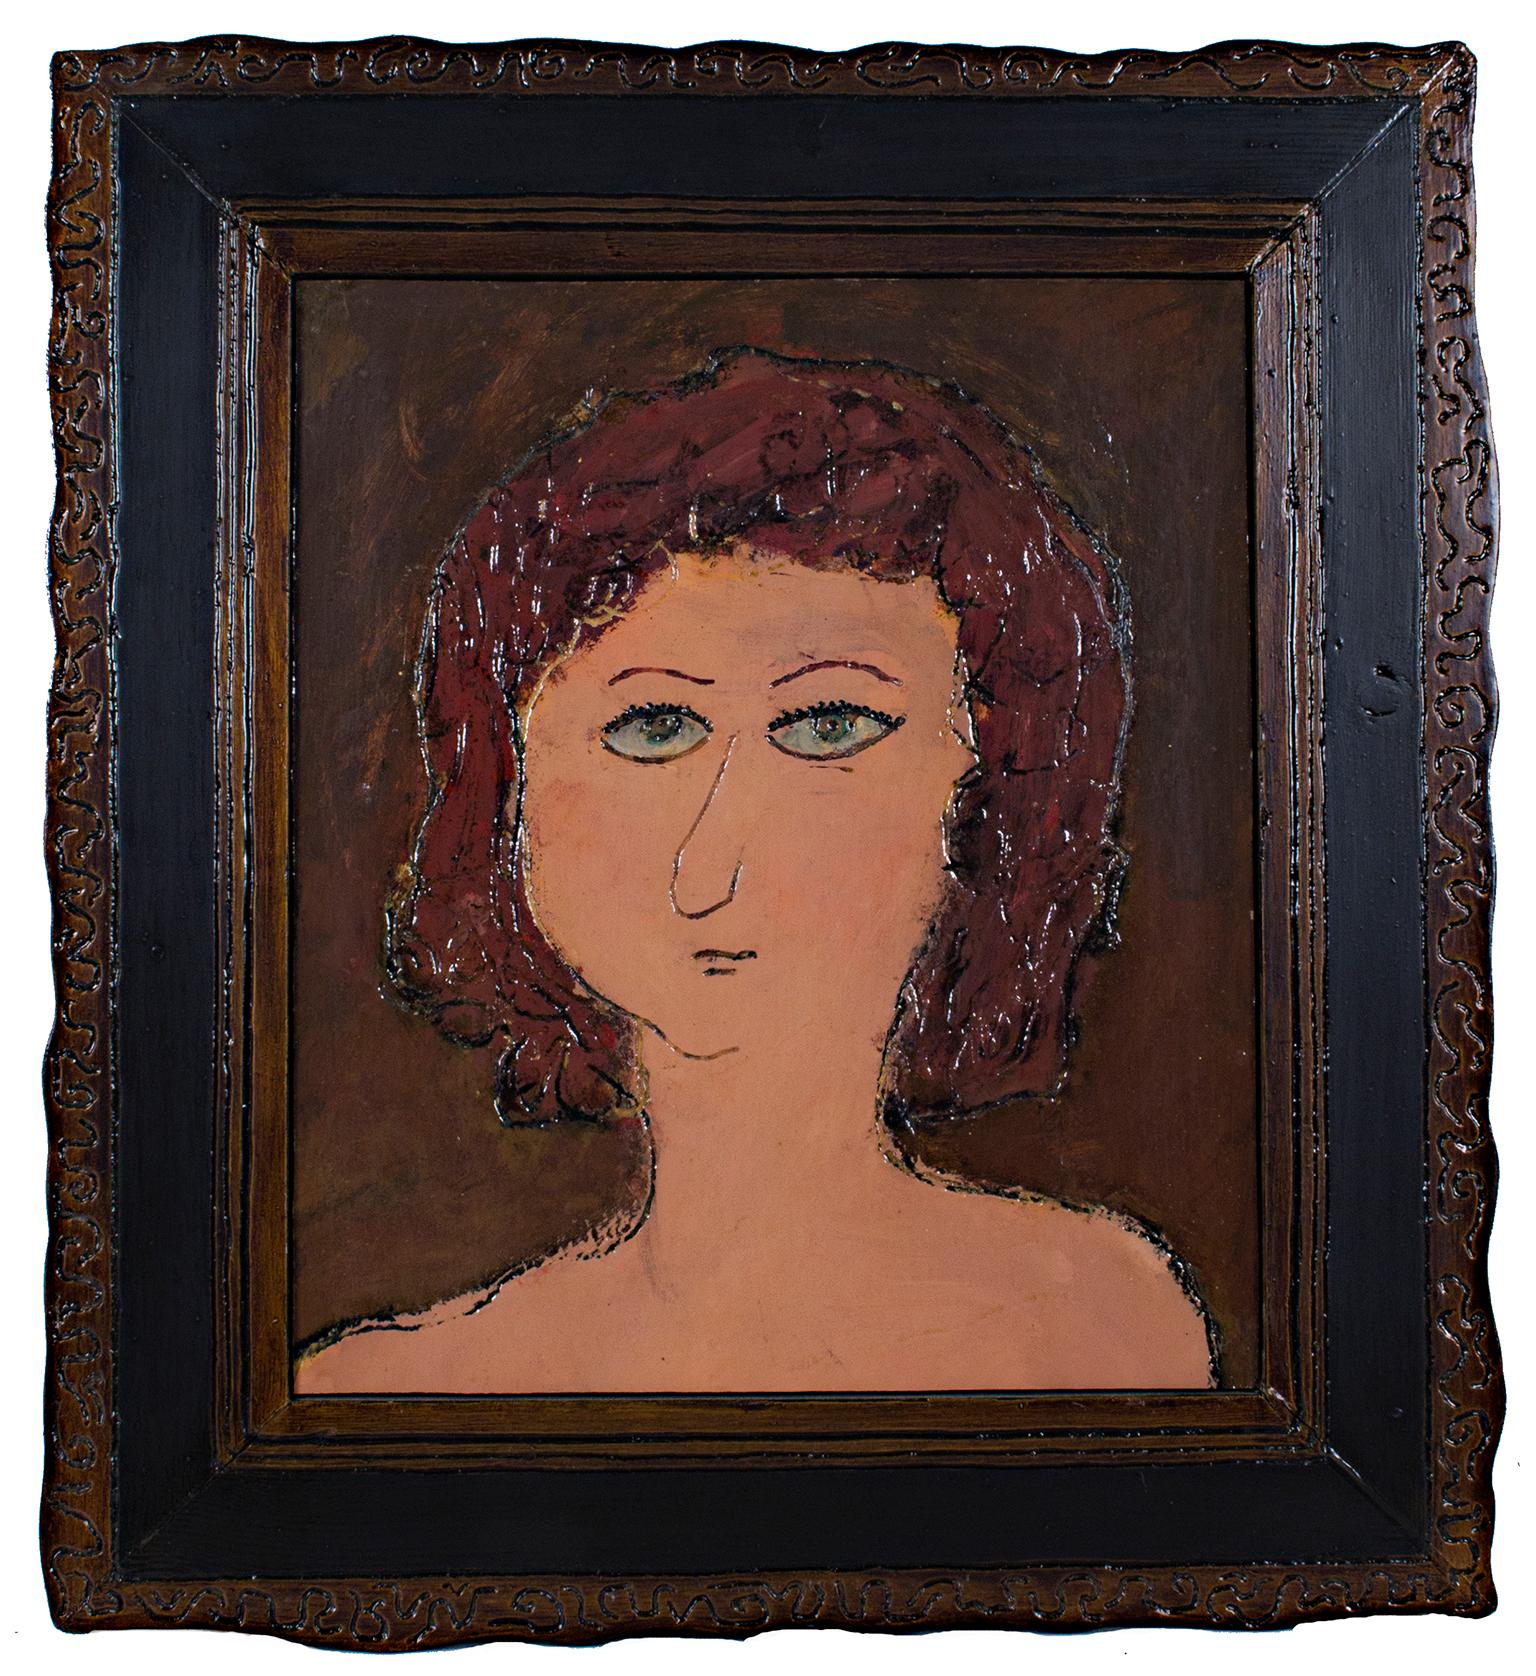 "Lee, " Portrait of Woman Oil on Wood signed on Verso by Robert Richter